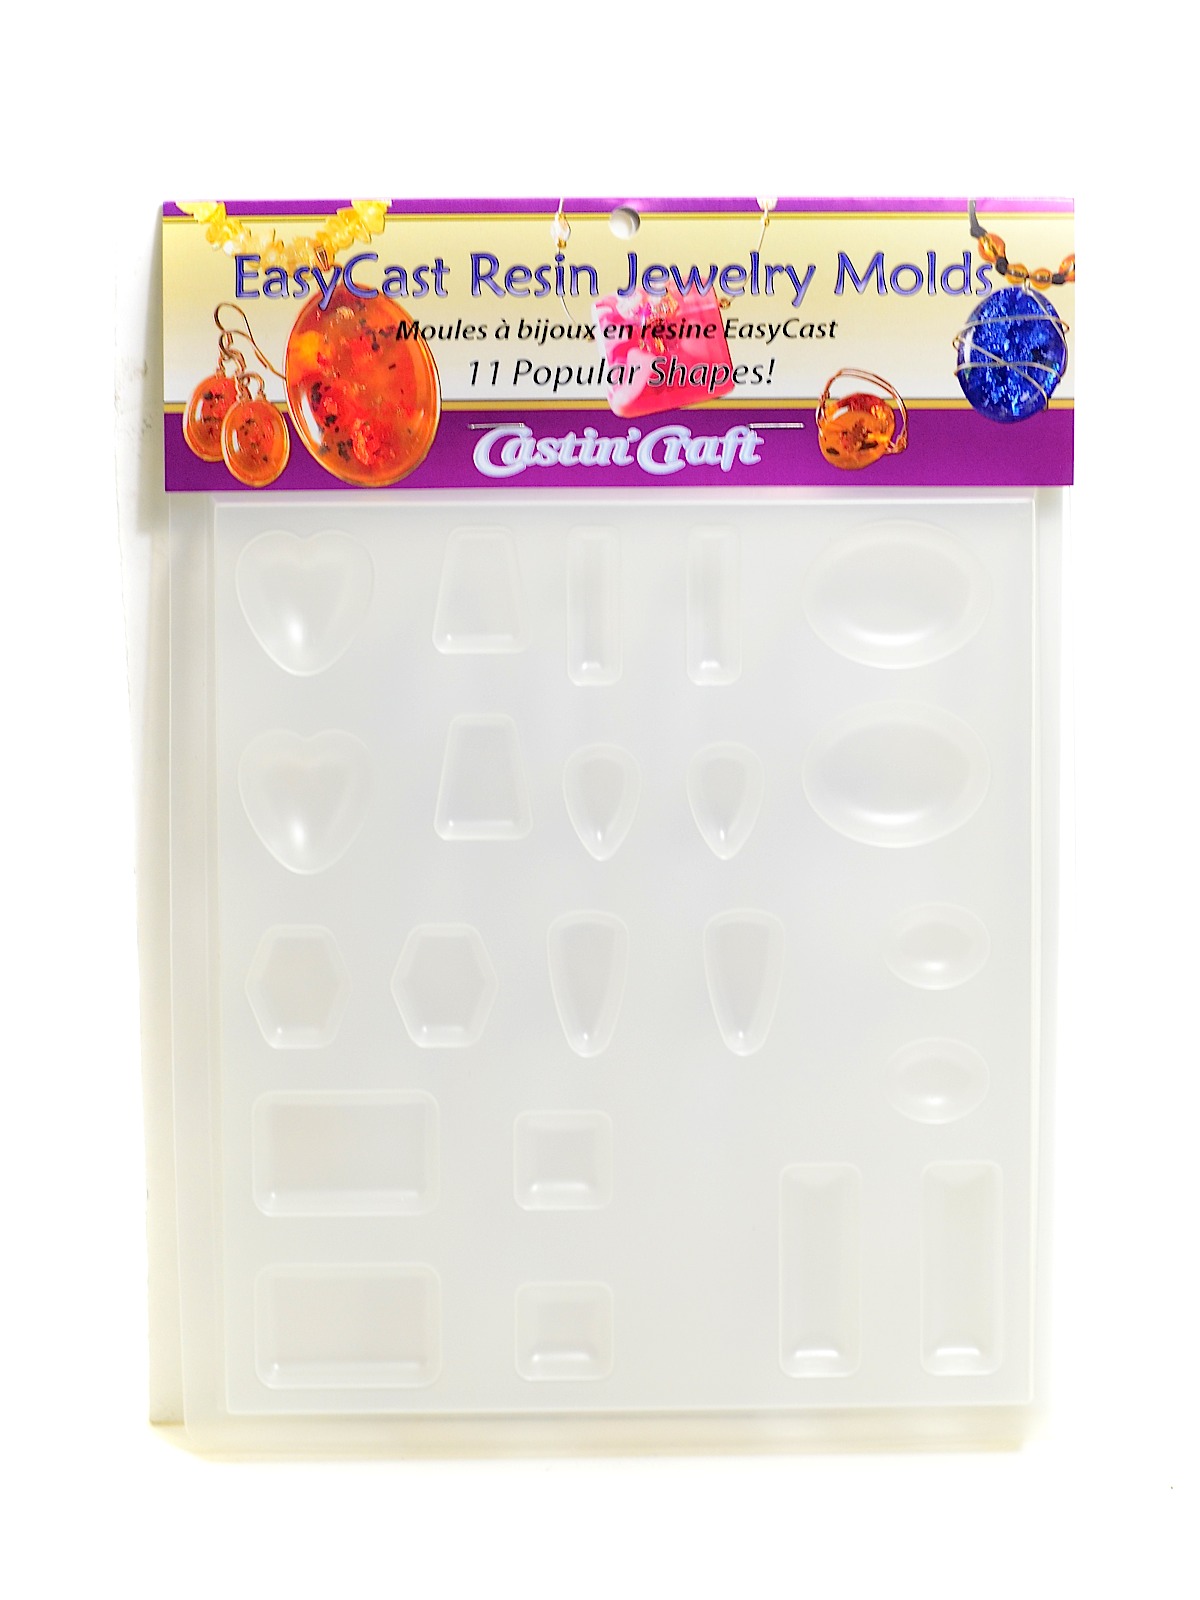 Easycast Resin Jewelry Molds Tray Of 11 Shapes